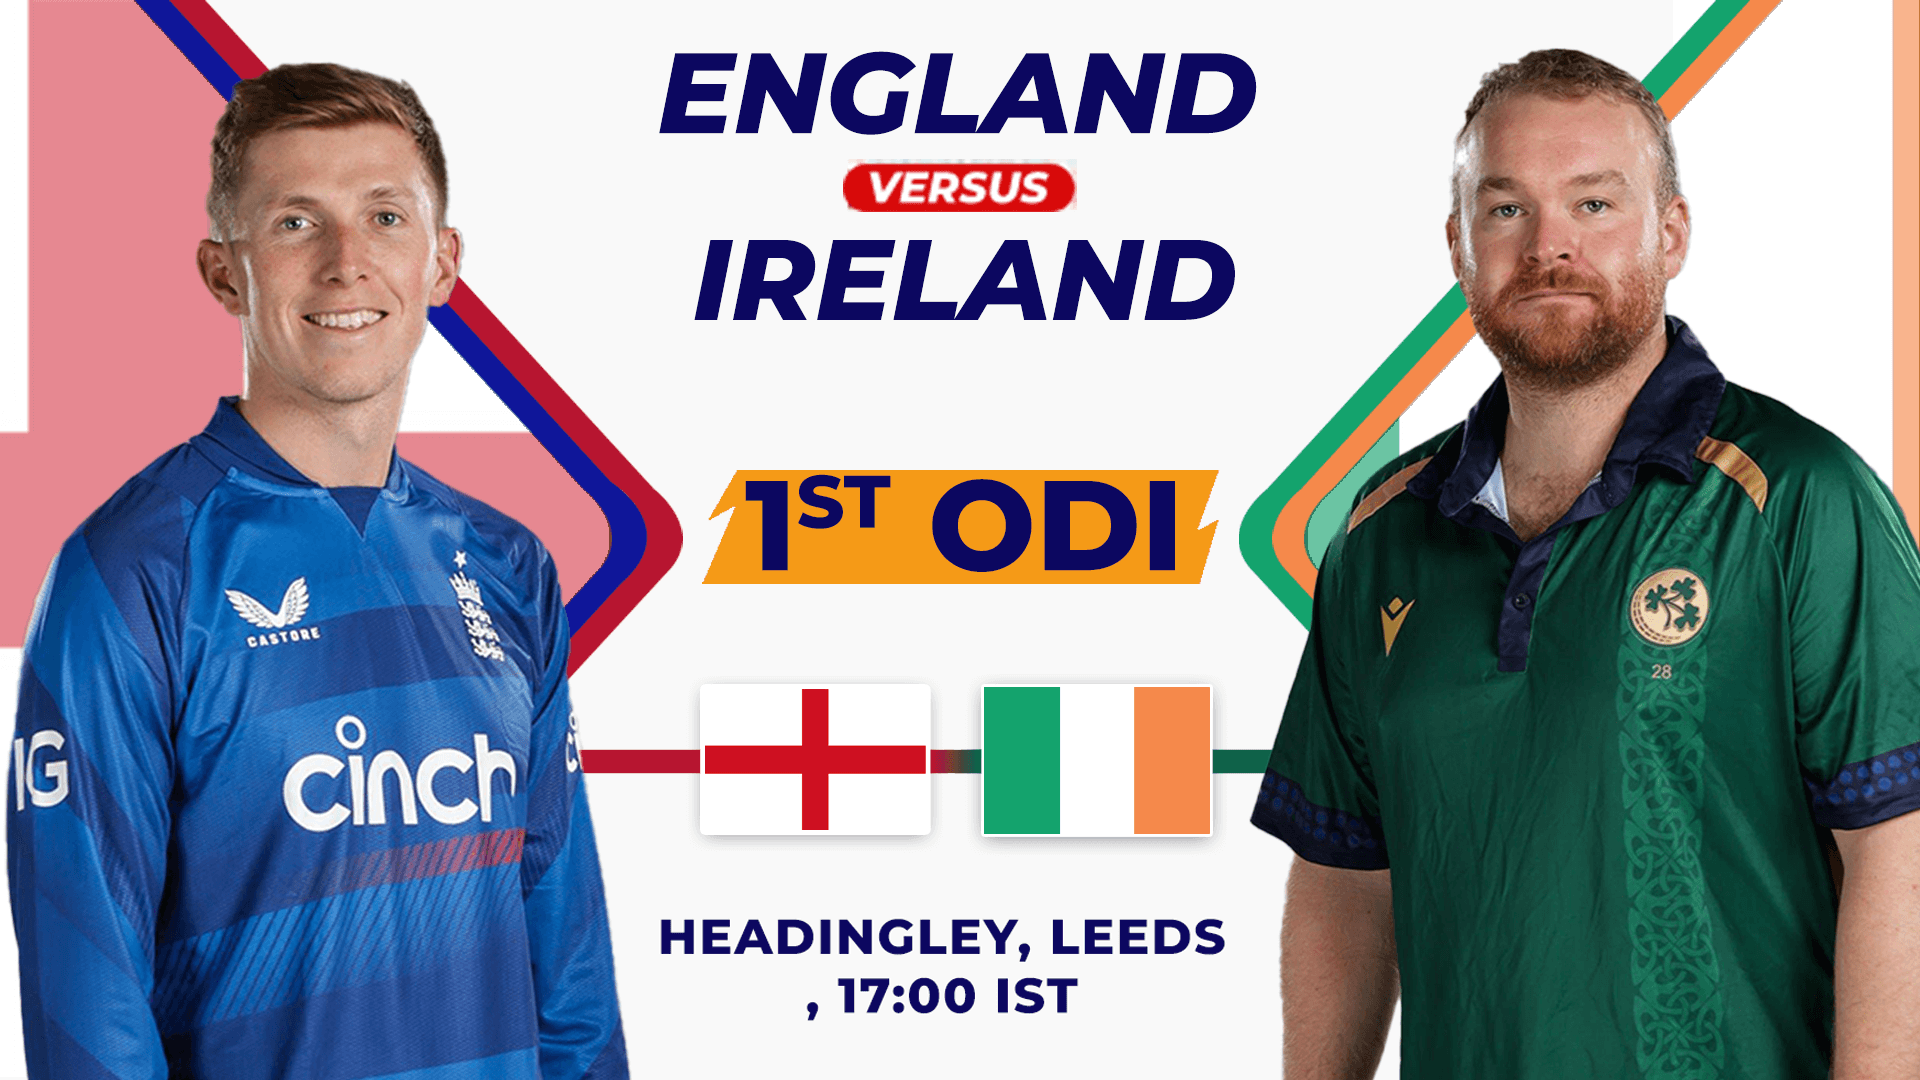 ENG vs IRE